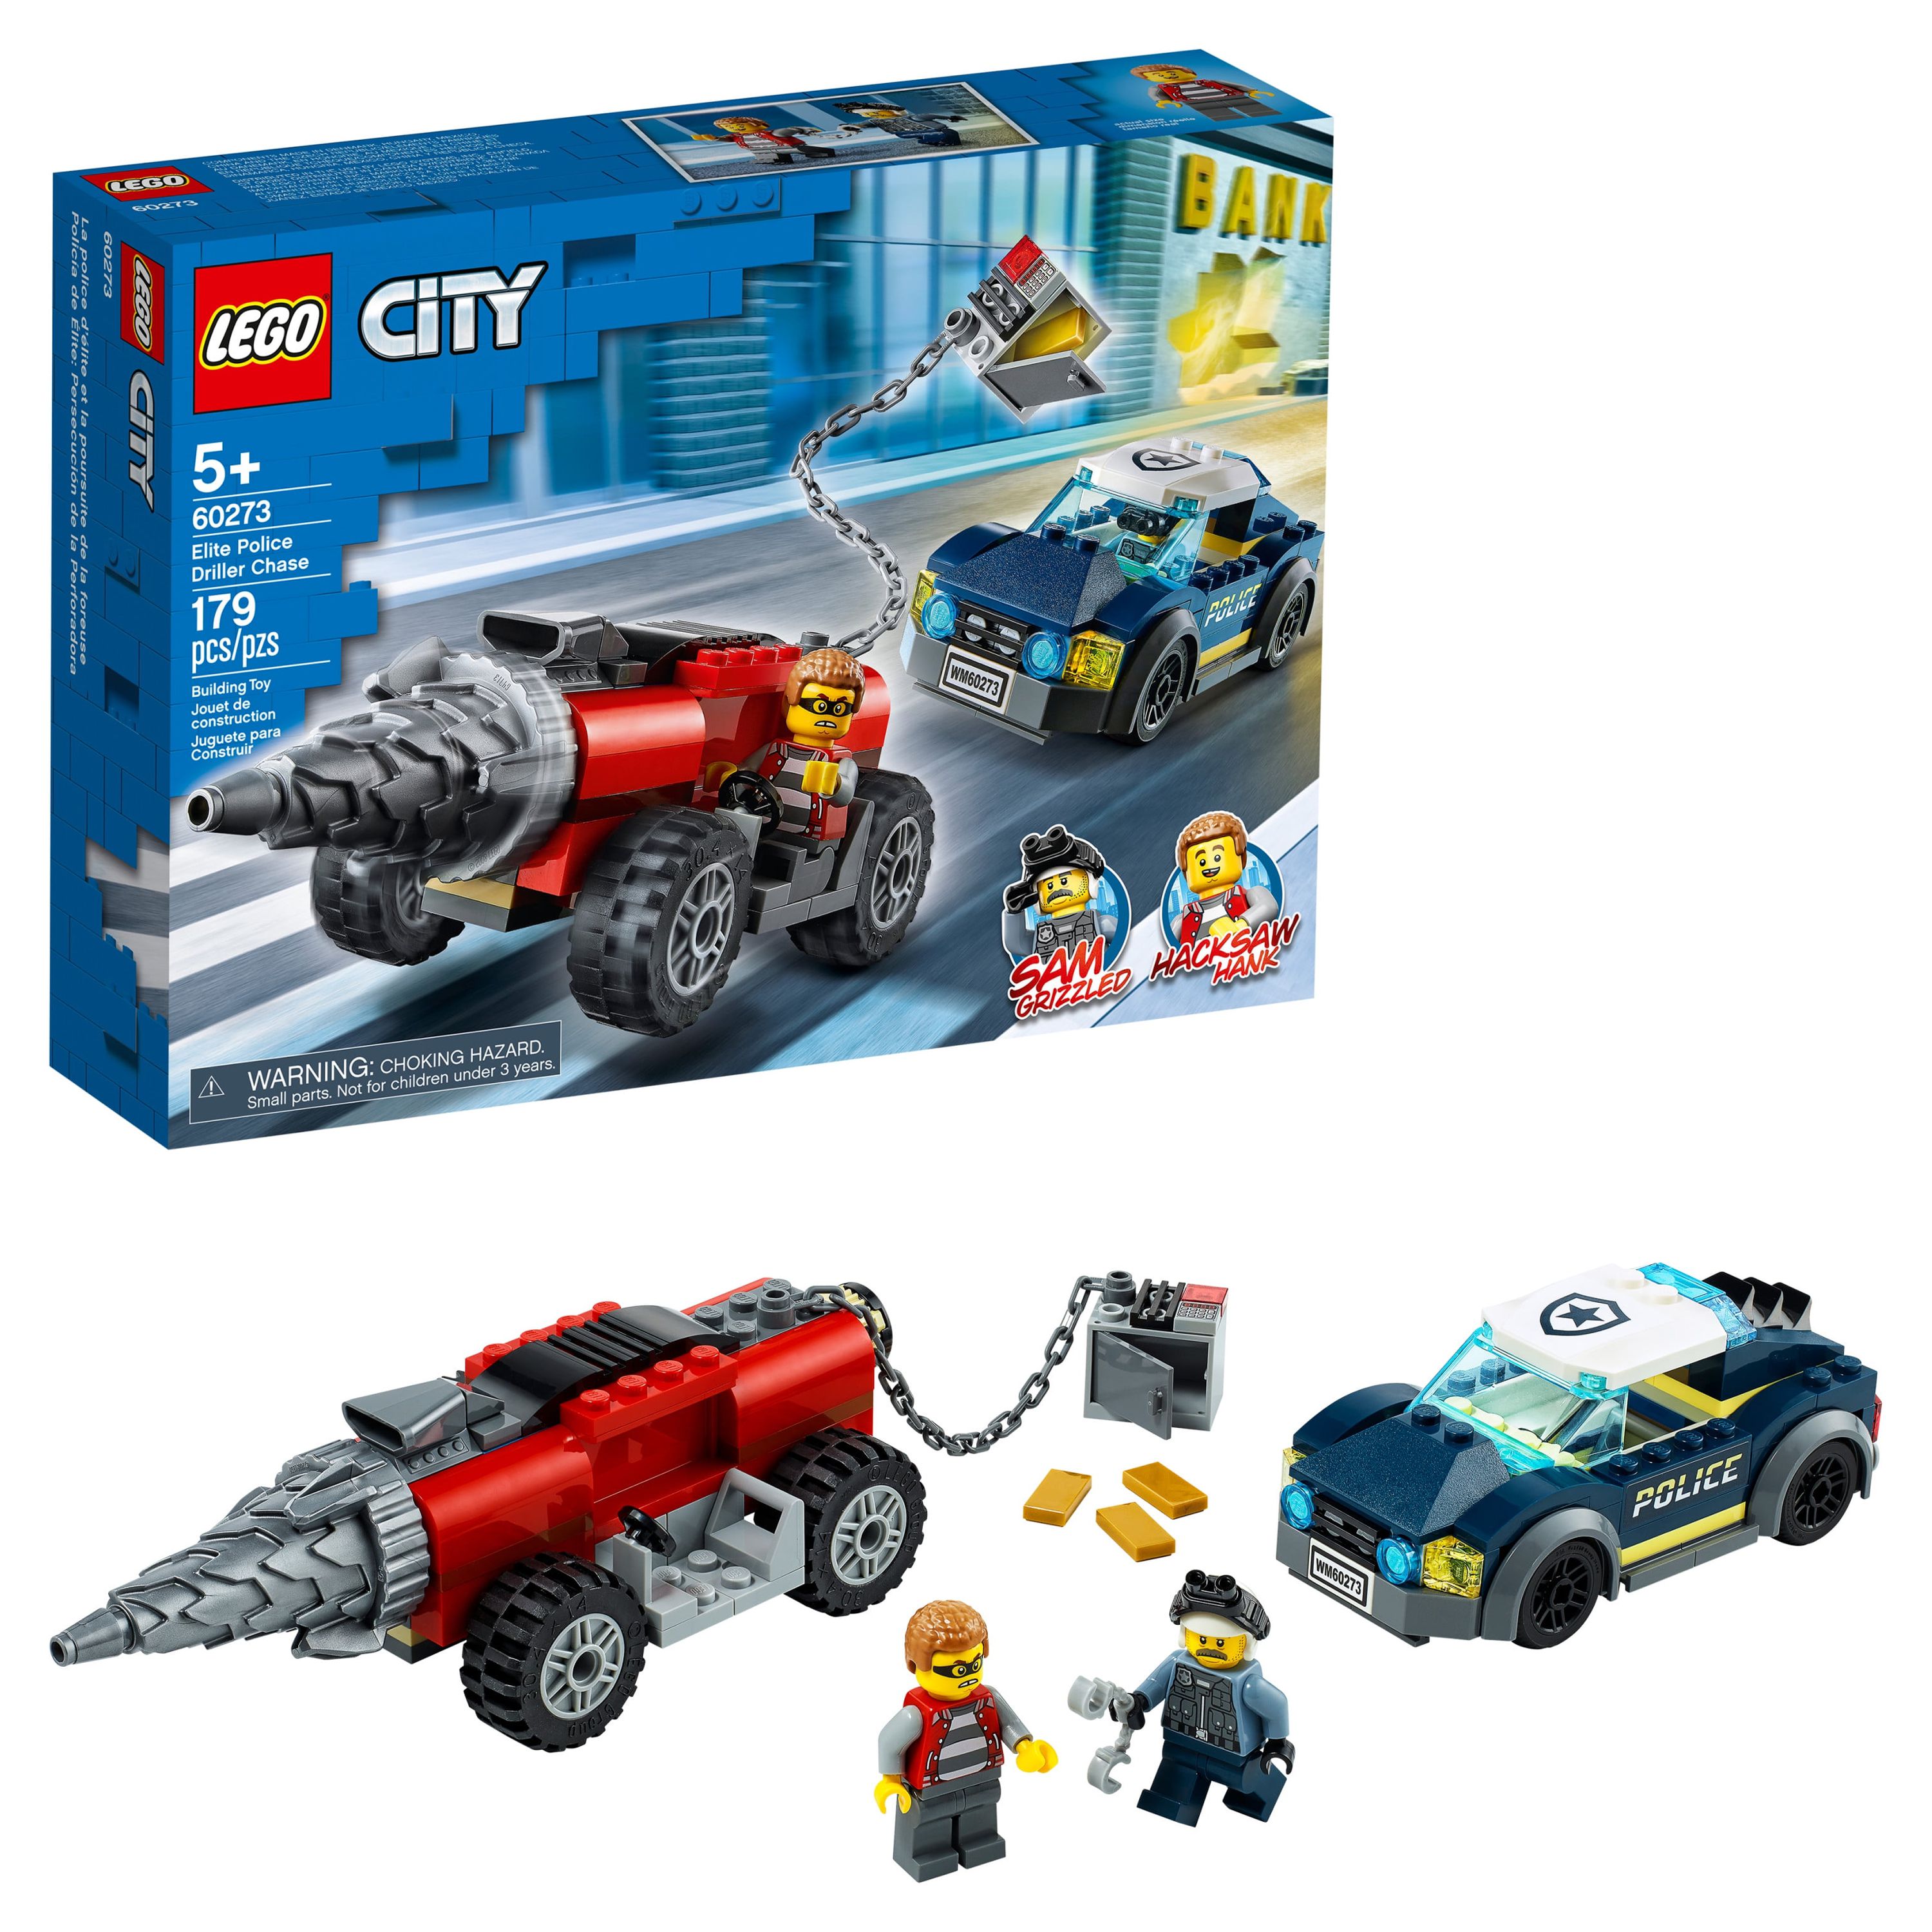 LEGO City Police Police Driller Chase 60273 - image 1 of 8